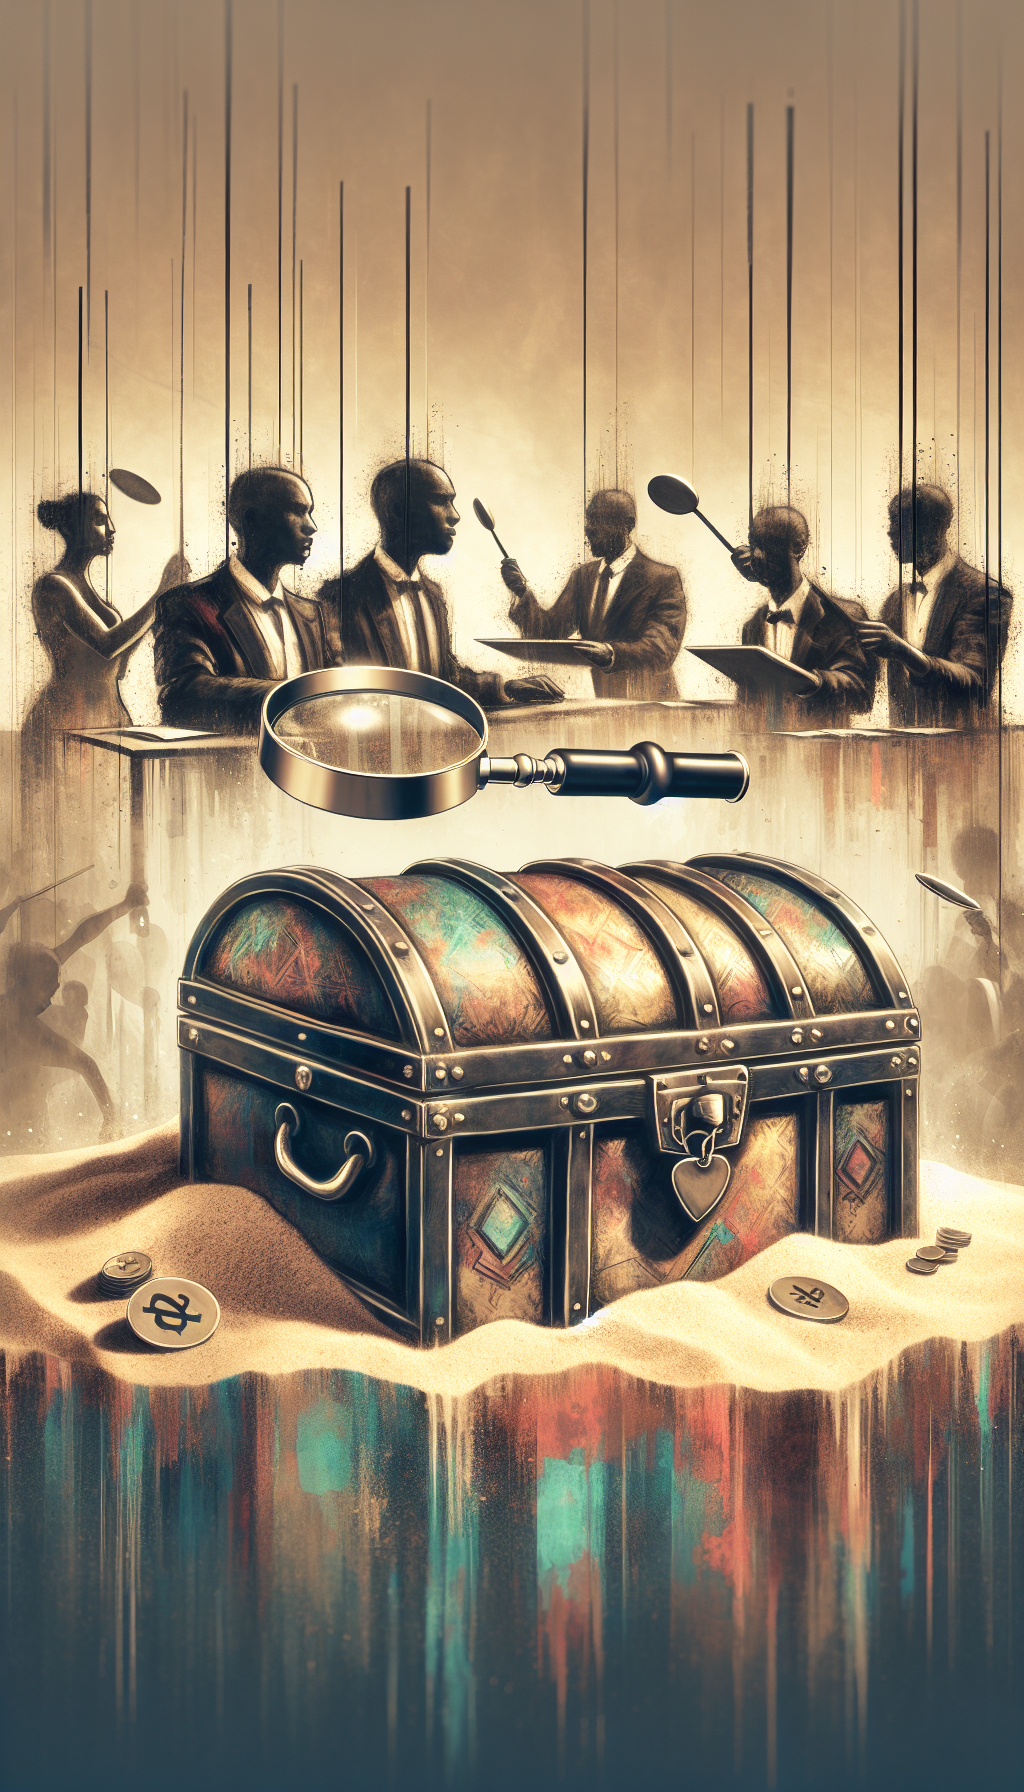 A vintage, ornate treasure chest rests half-buried in sand, its lid ajar, revealing glints of gold, rare coins, and antique jewelry. A magnifying glass hovers over, highlighting a price tag on a timeless piece, while in the background, shadowy figures of auctioneers raise paddles. The illustration's style transitions from sepia-toned realism near the chest to abstract, colorful expressions of excitement and value around the bidders.